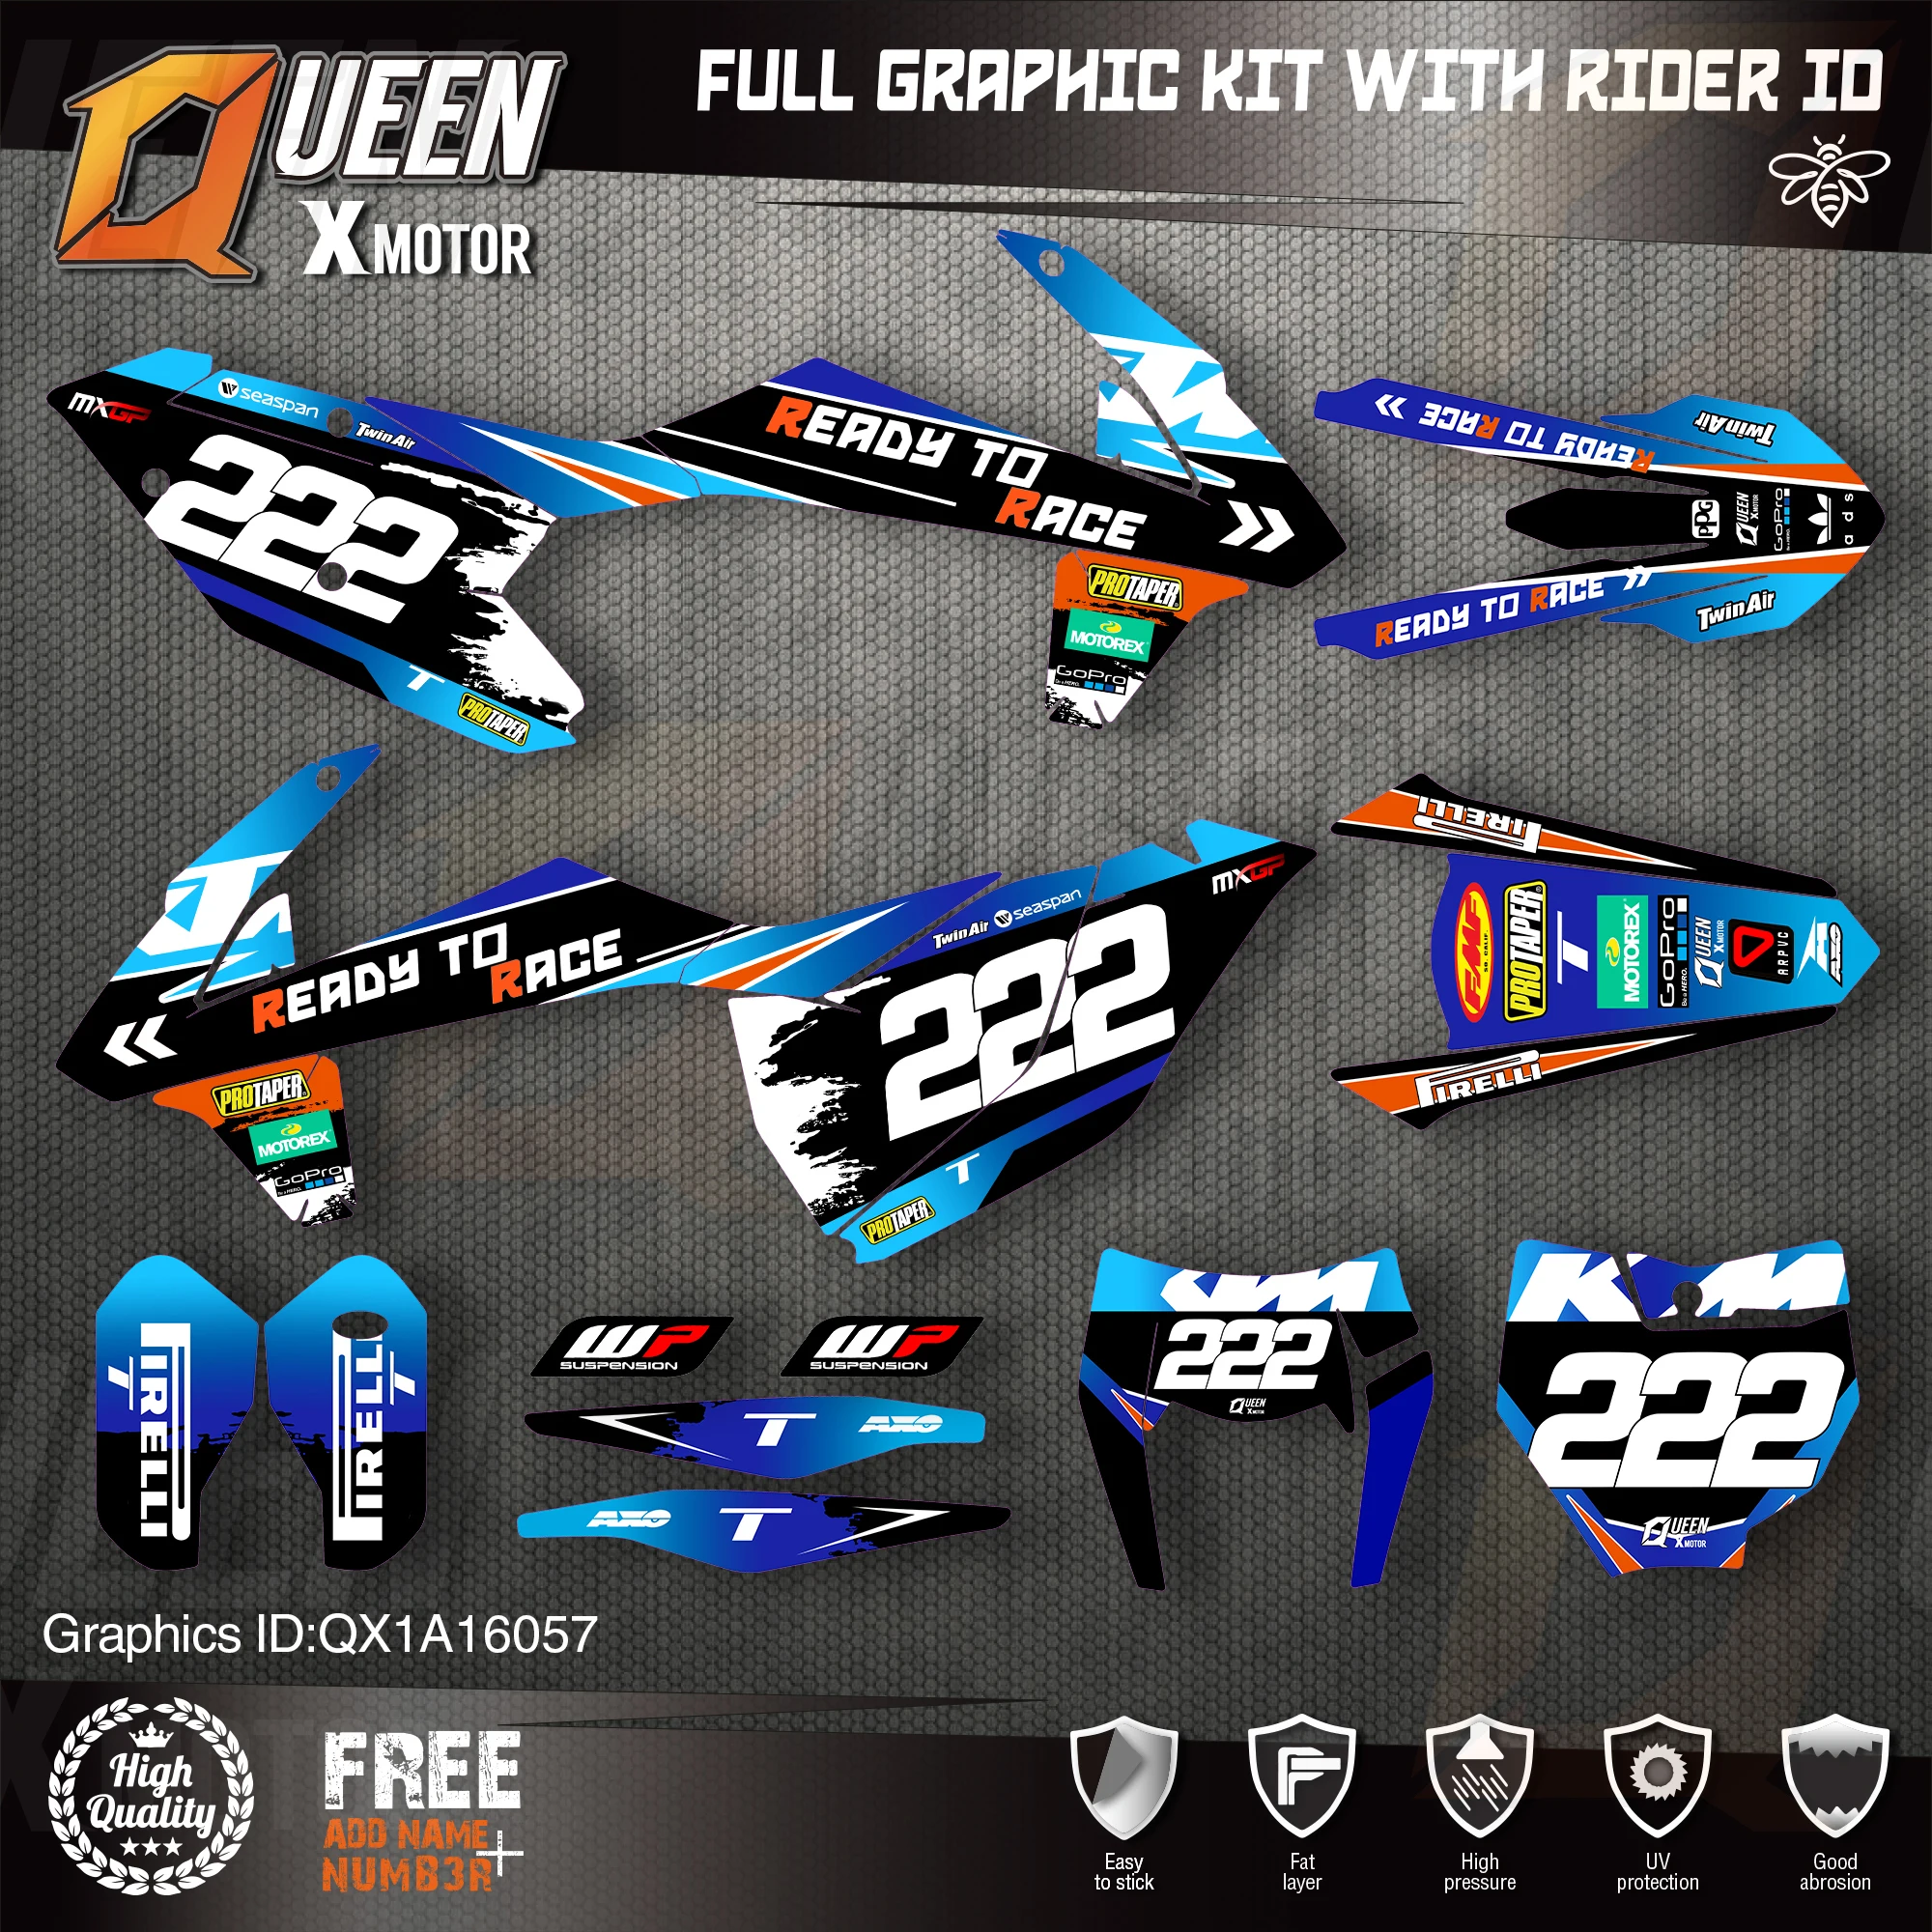 QUEEN X MOTOR Custom Team Graphics Decals Stickers Kit For KTM 2016 2017 2018 SX SXF , 2017 2018 2019 EXC XC-W EXC-F 057